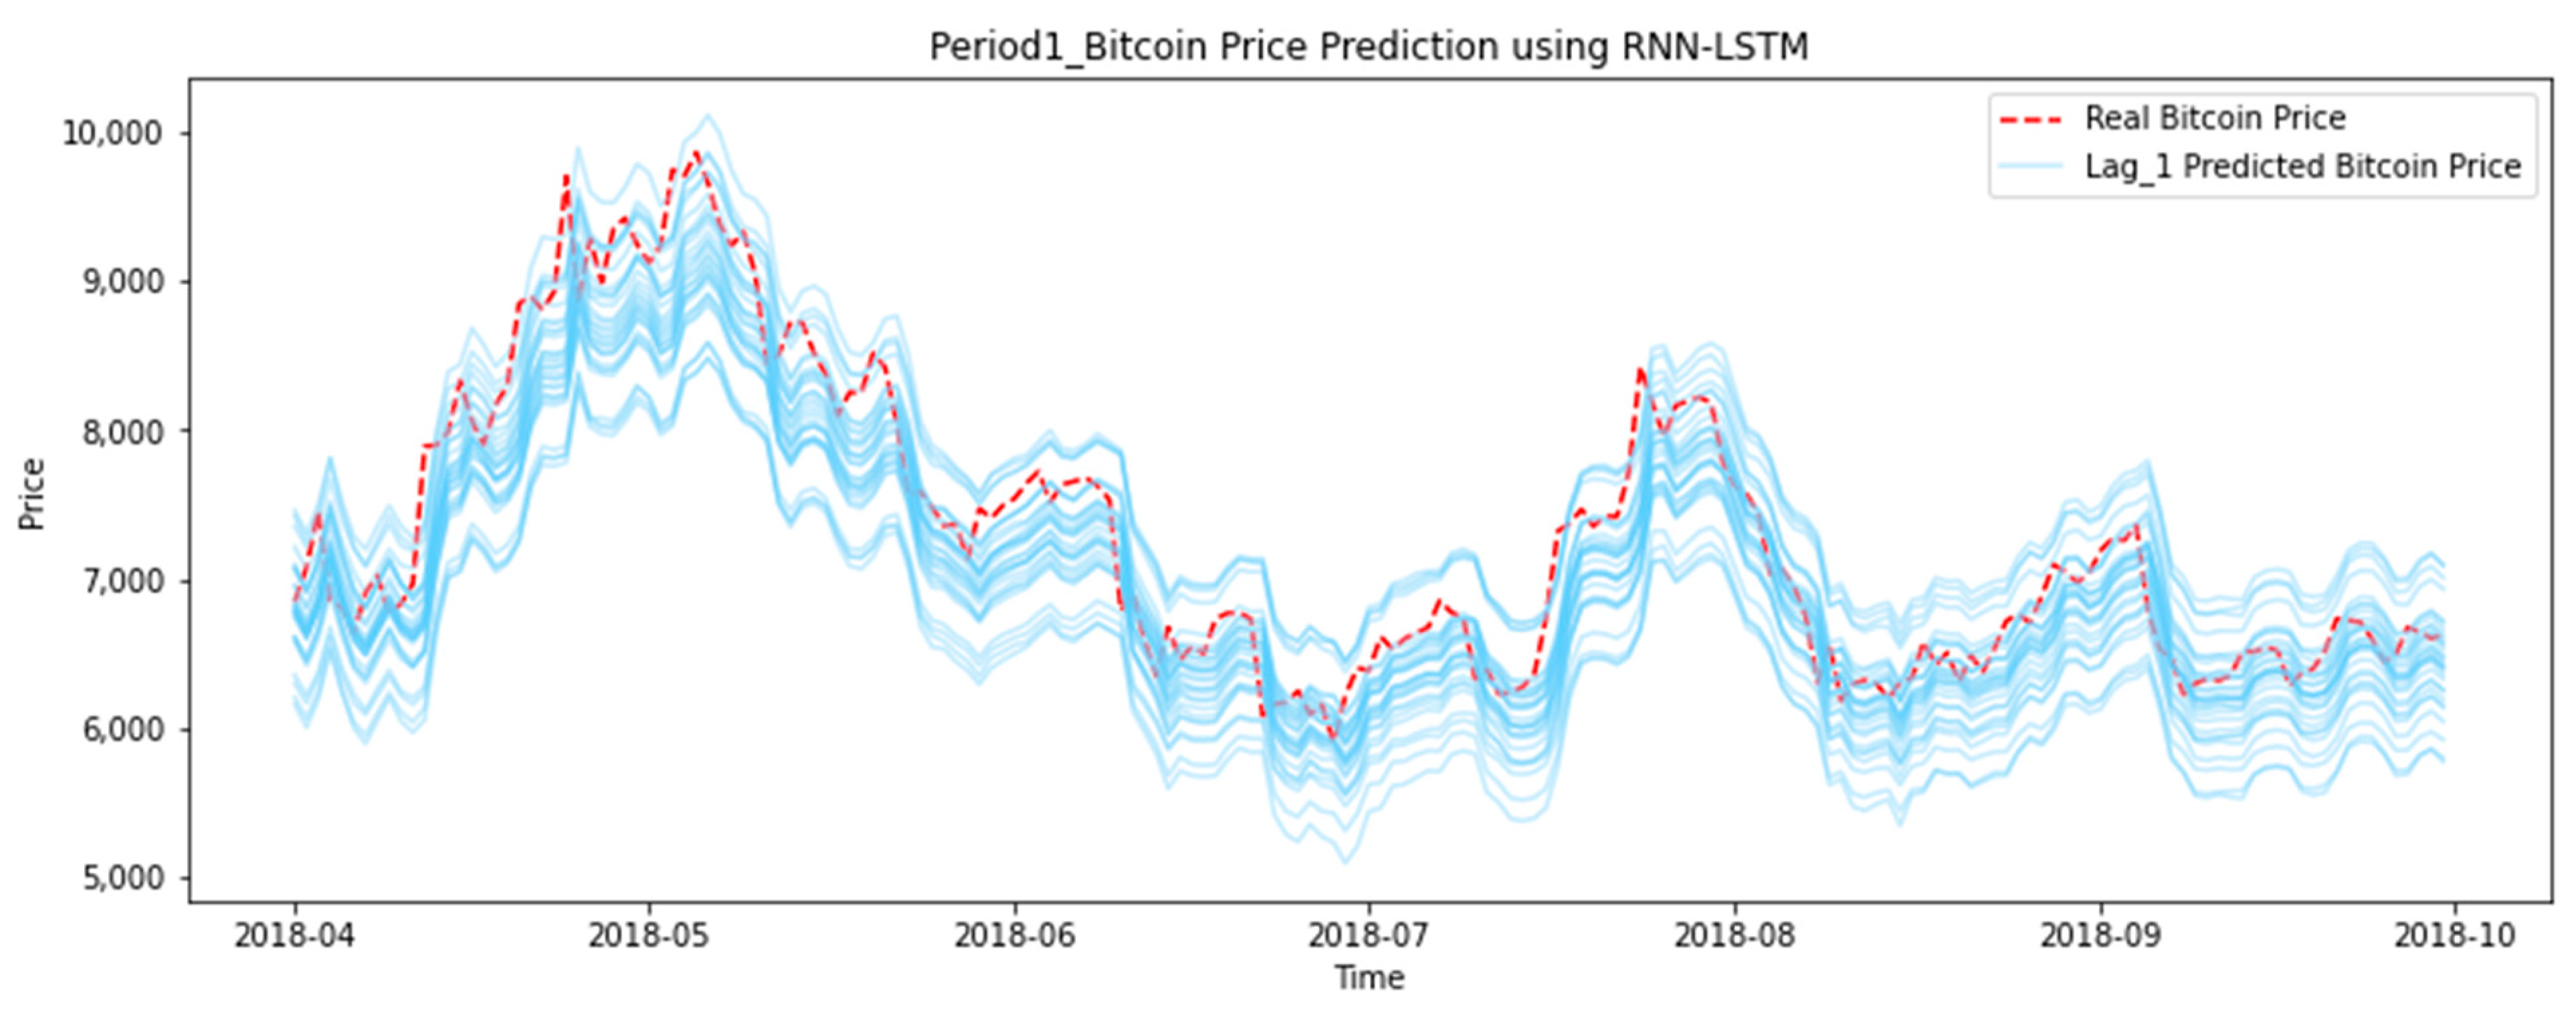 RPubs - Bitcoin Modelling and forecasting using time series